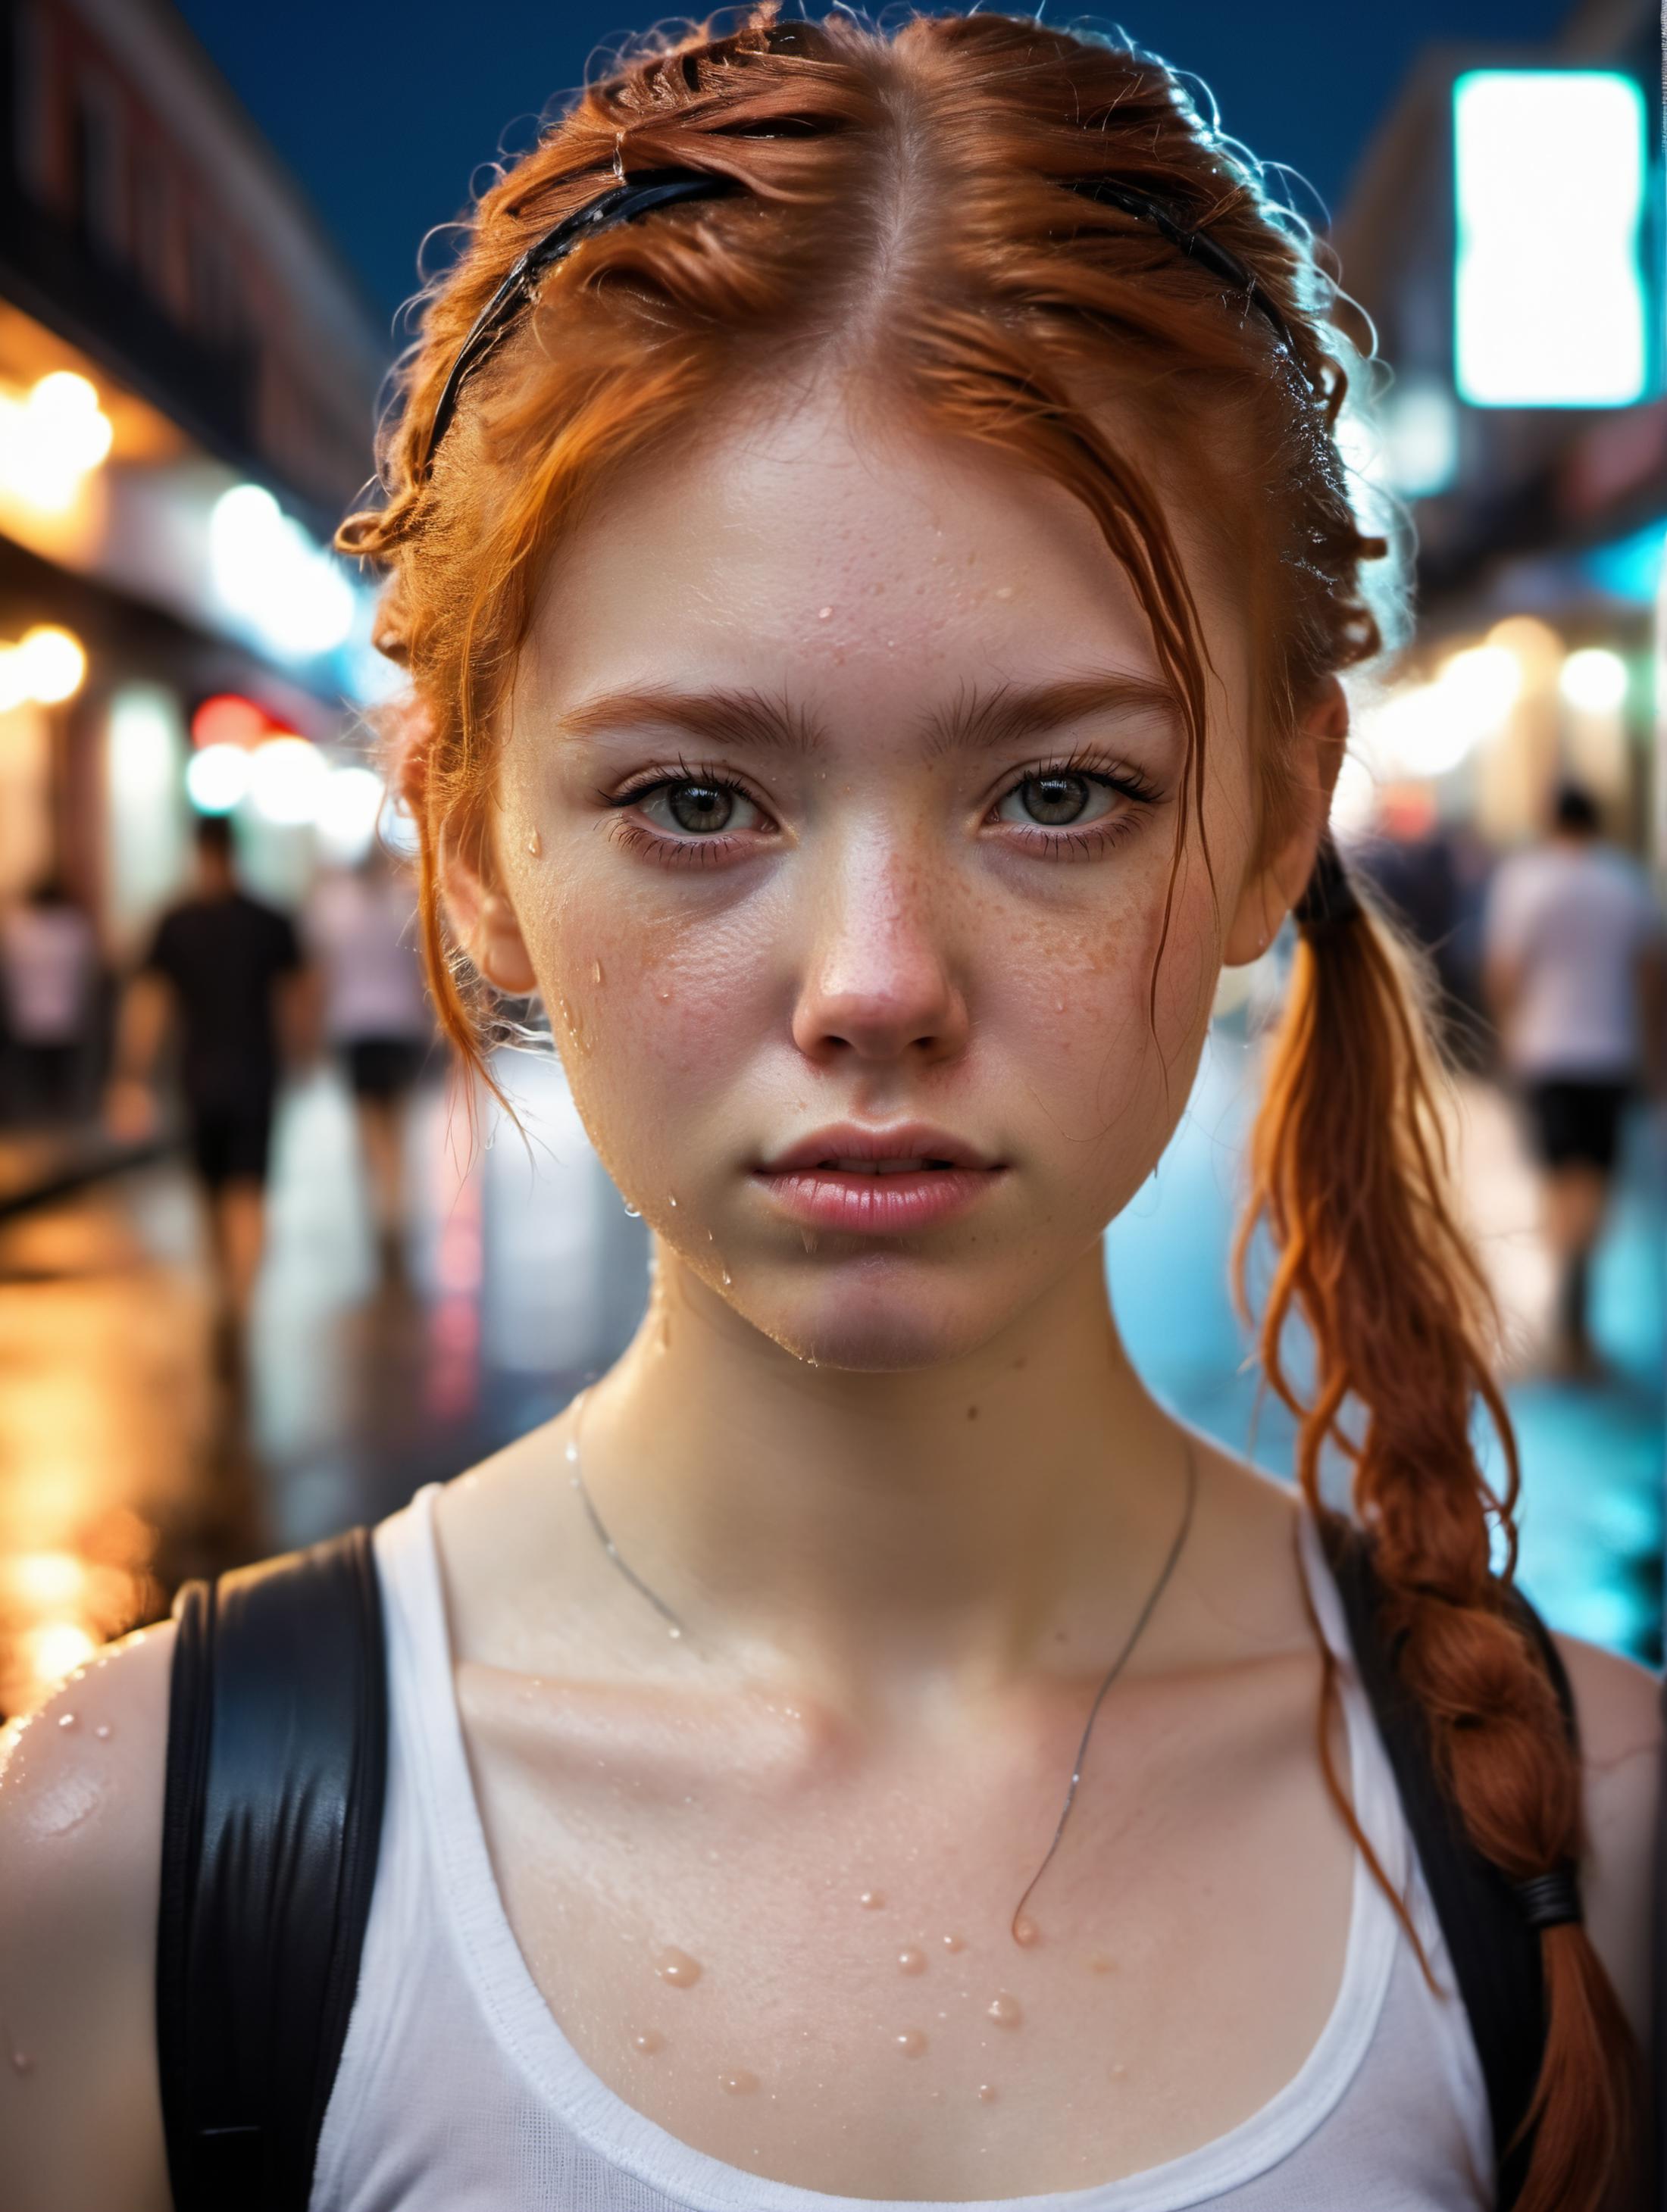 A redheaded woman with braces in a wet shirt and a ponytail.